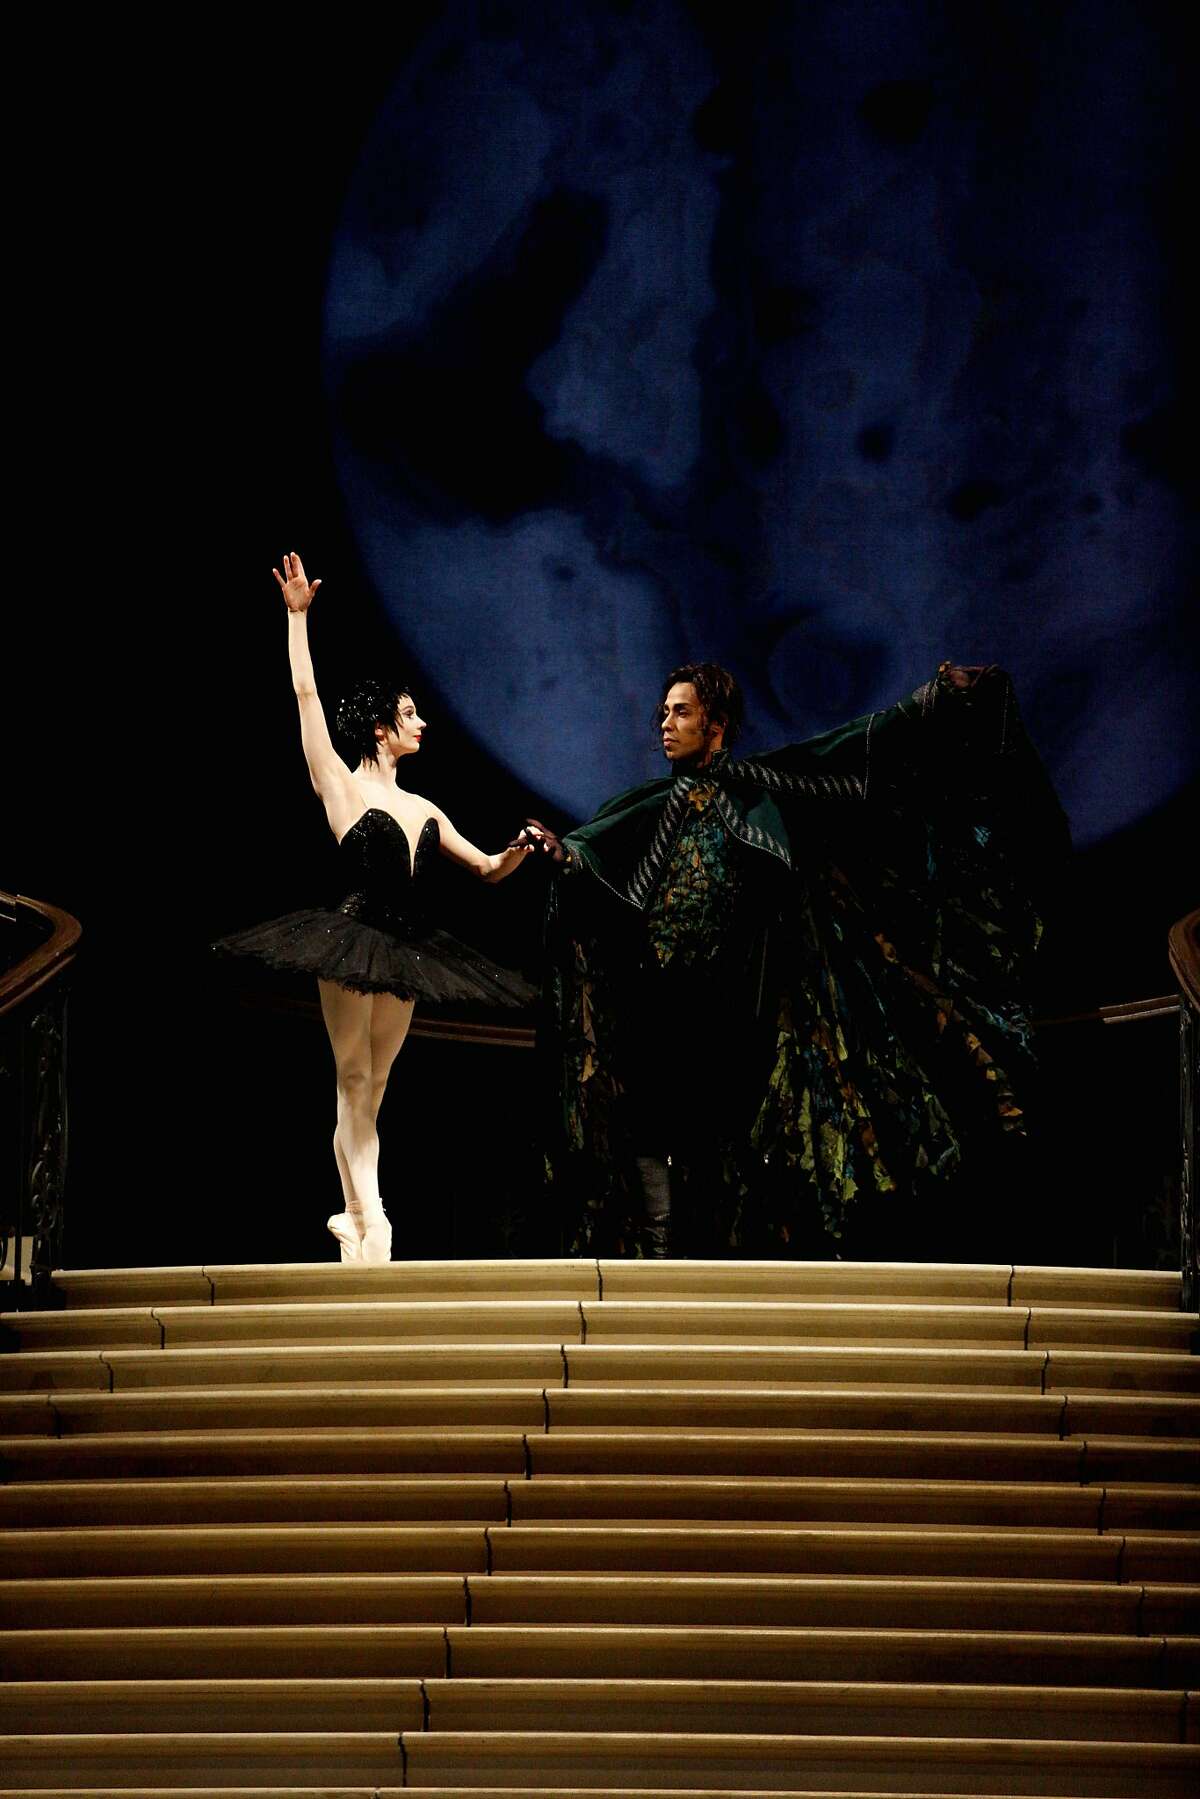 Maria Kochetkova, left, and Daniel Deivison-Oliveira perform during a dress rehearsal of Sawn Lake in the War Memorial Opera House on Thursday, March 30, 2017, in San Francisco, Calif.